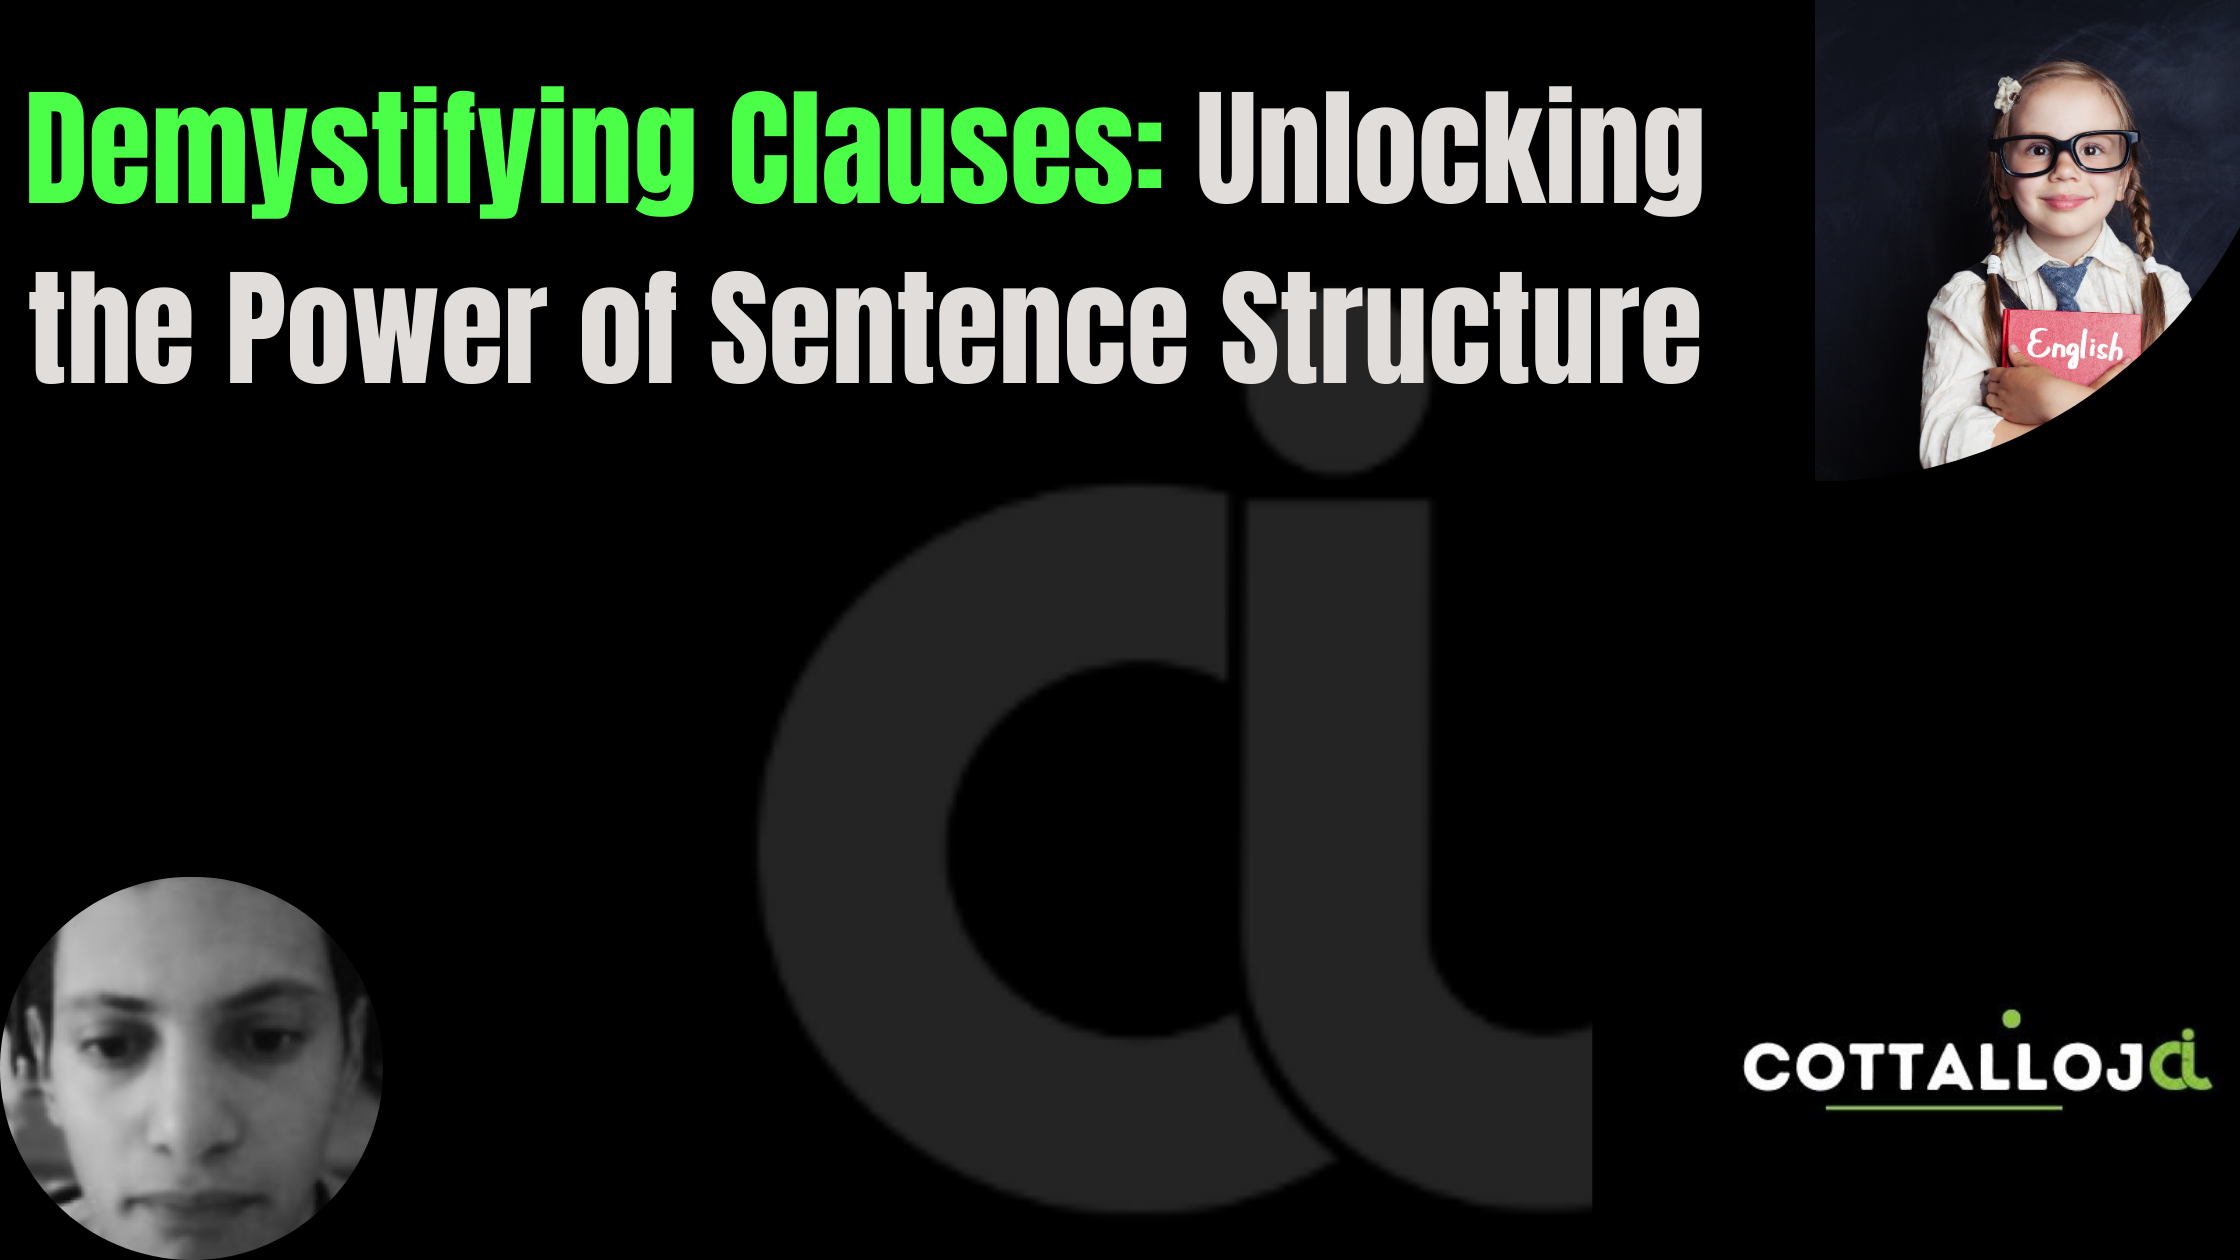 Demystifying Clauses: Unlocking the Power of Sentence Structure